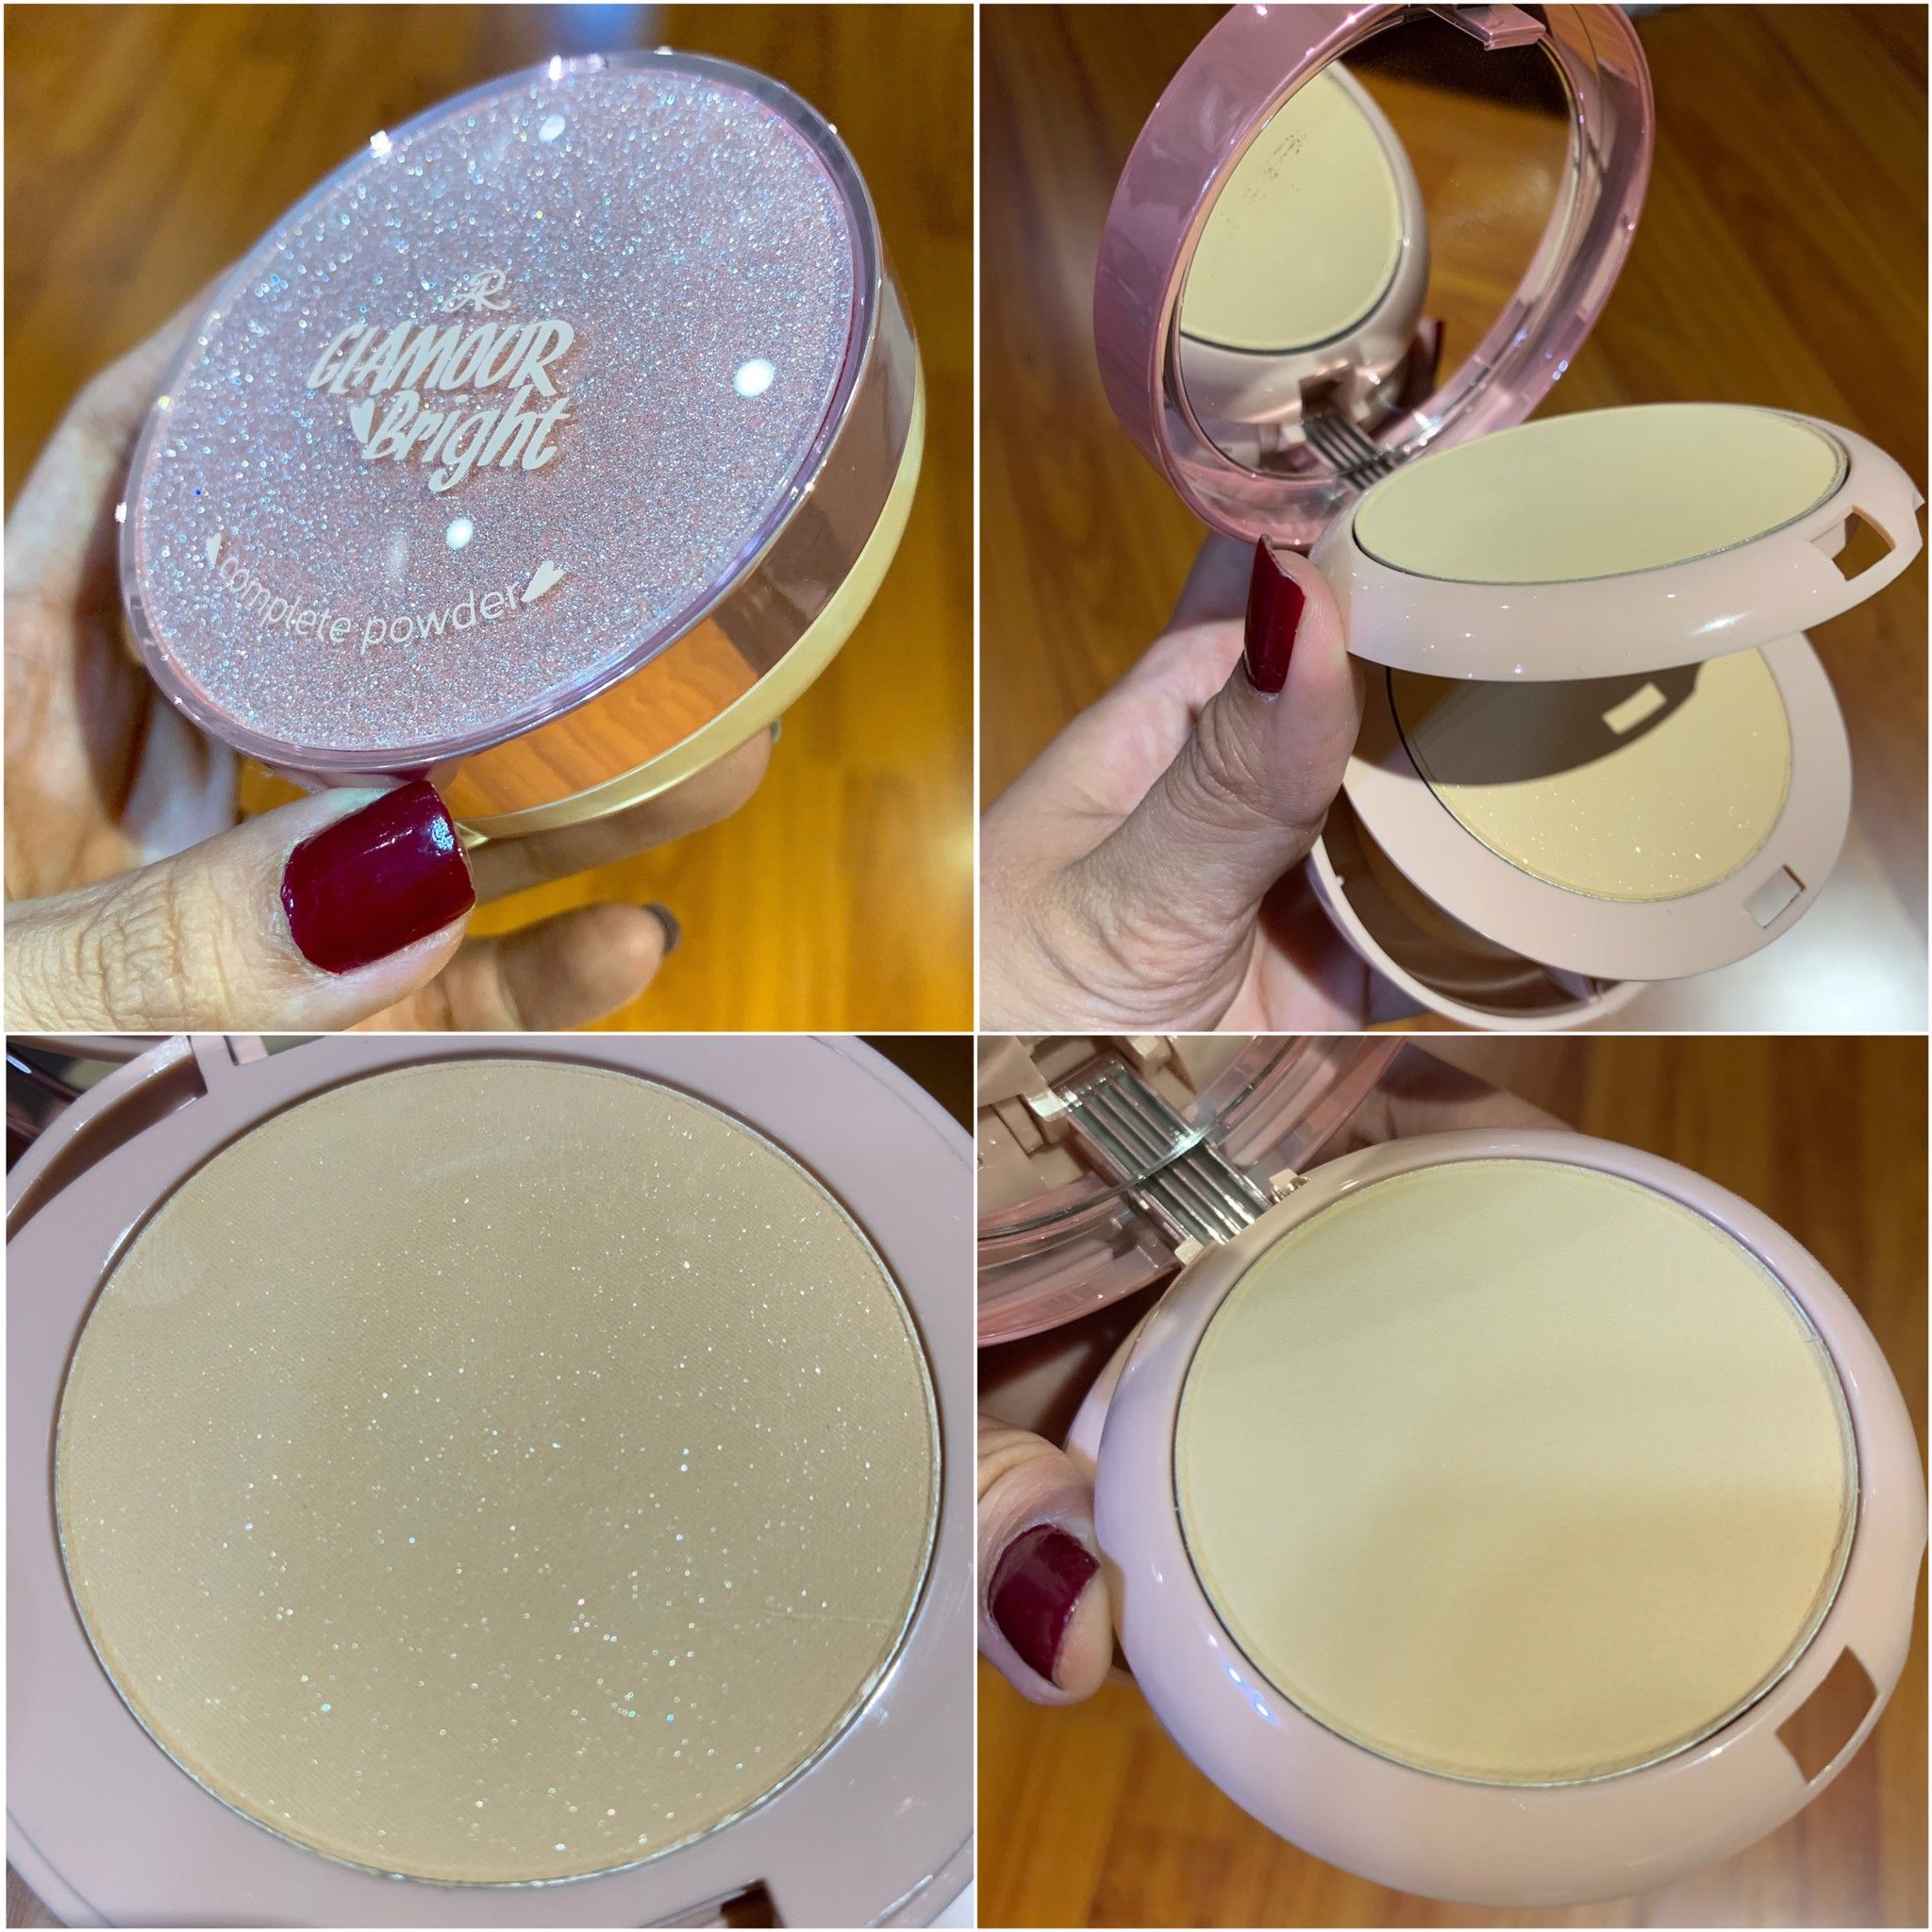  PHẤN PHỦ 2 TẦNG ARON GLAMOUR BRIGHT 2 TẦNG 